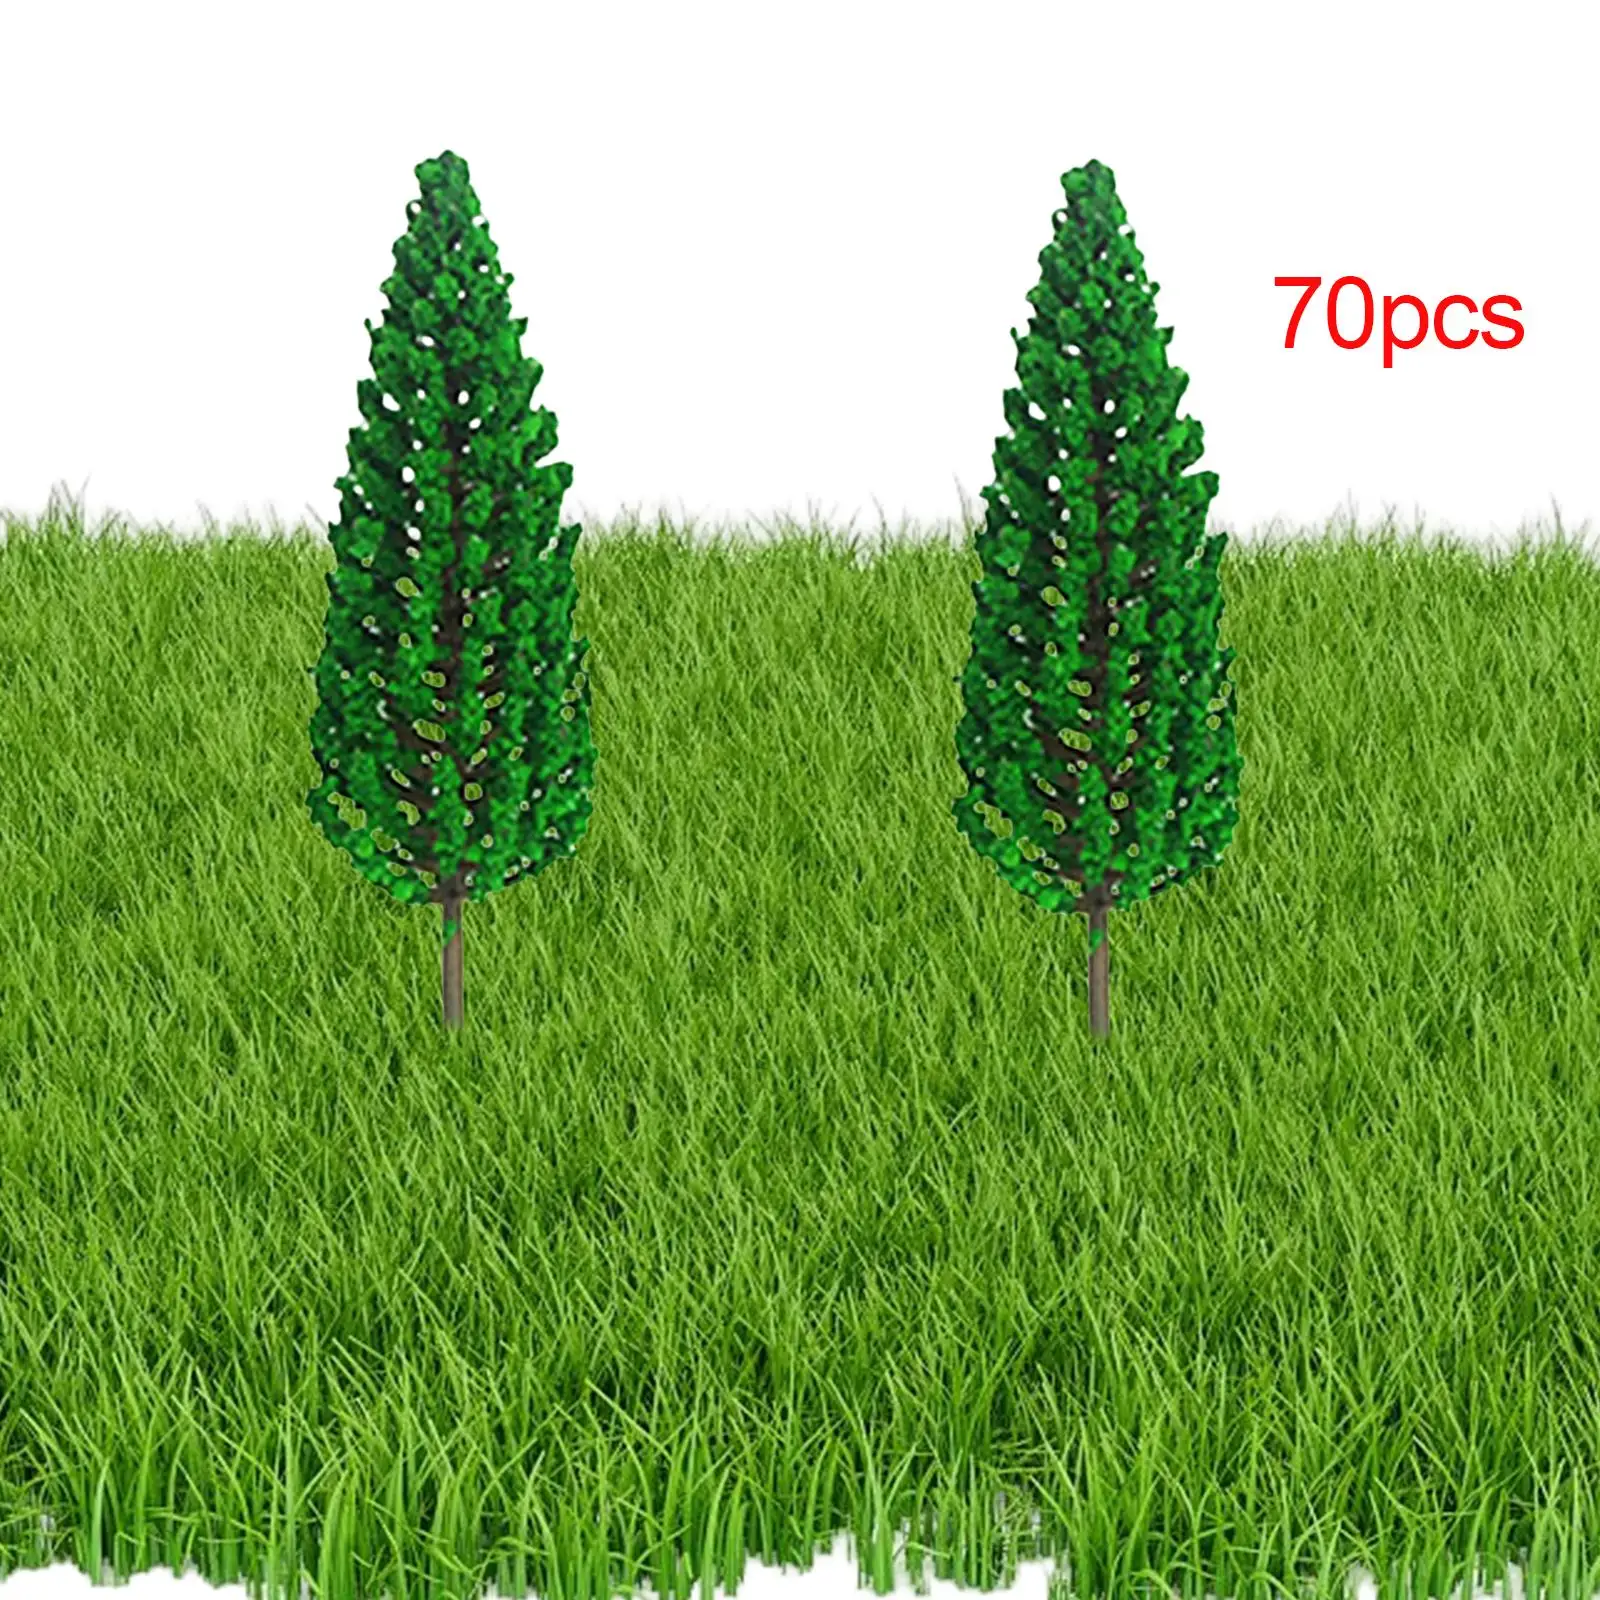 70 Pieces Model Trees 1/300 Scale Train Scenery Architecture Trees Miniature Landscape Trees for DIY Crafts Scenery Accessories